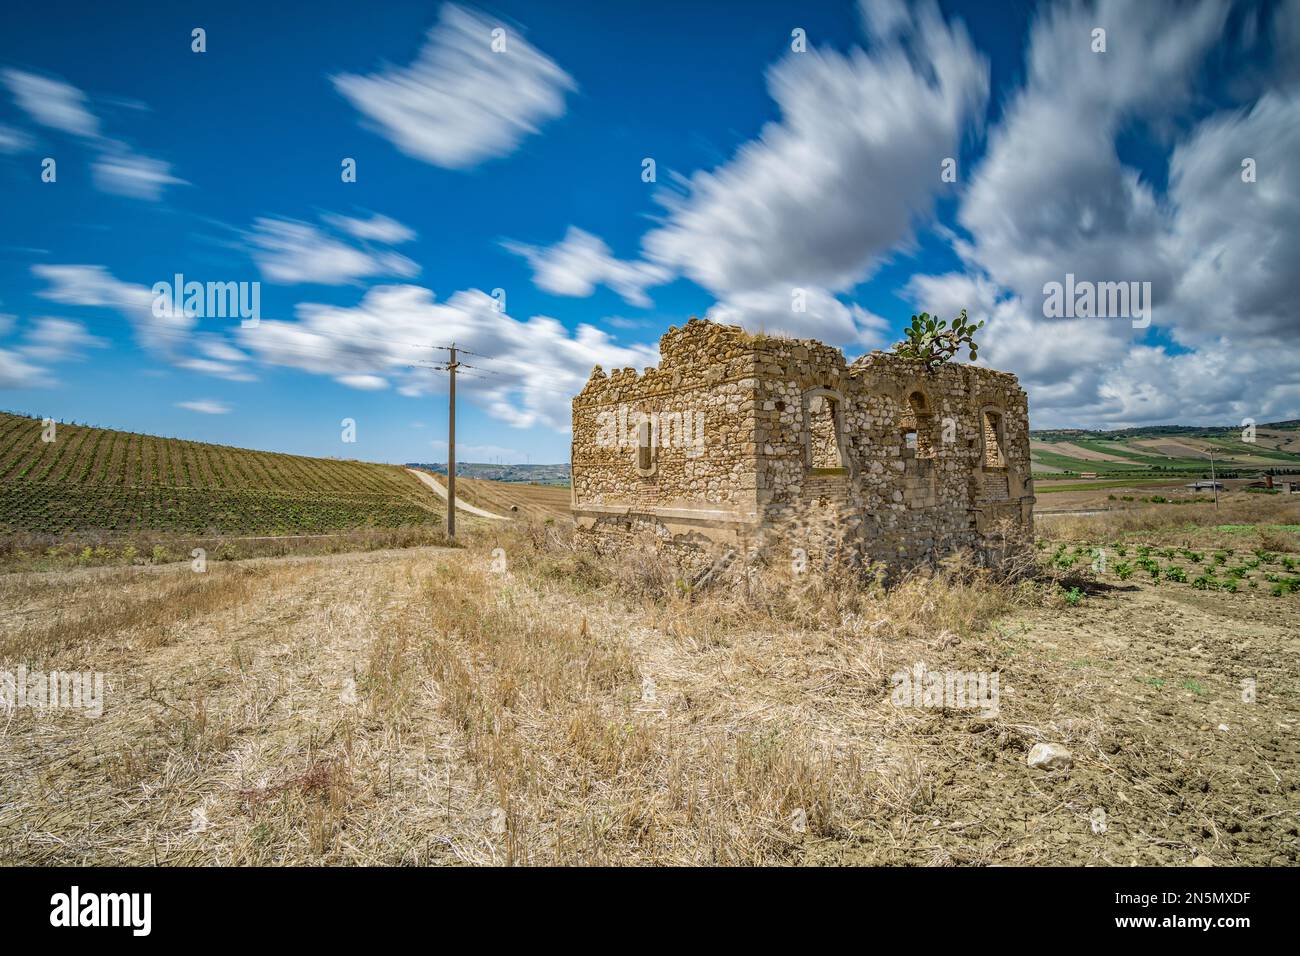 Abandoned country house in the Sicilian hinterland, Italy Stock Photo